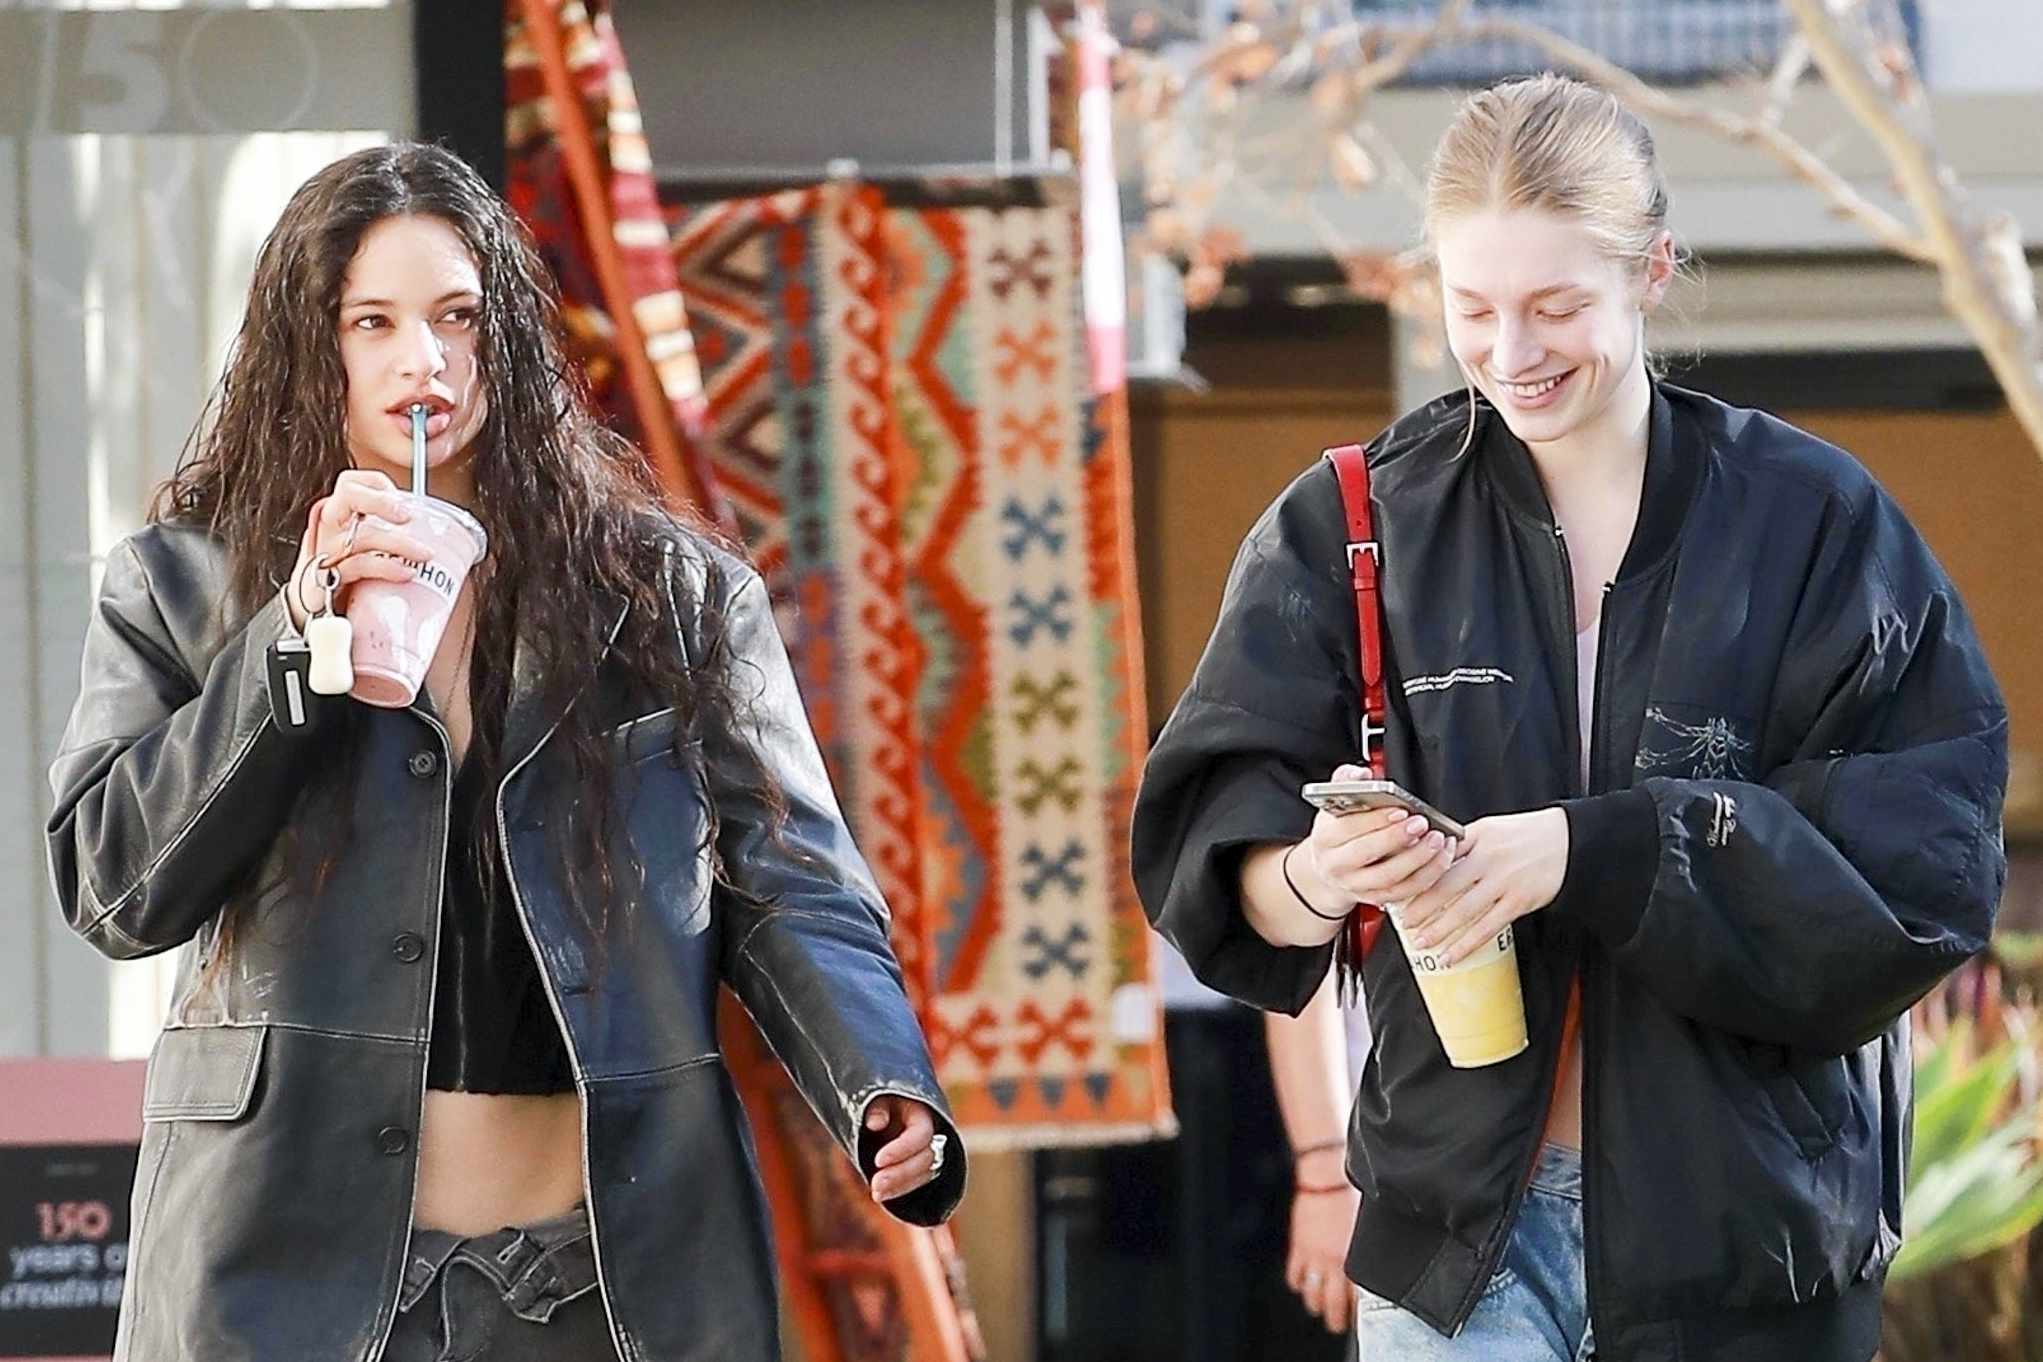 Singer Rosalia & actress Hunter Schafer seen drinking Erewhon smoothies & wearing matching outfits in Los Angeles